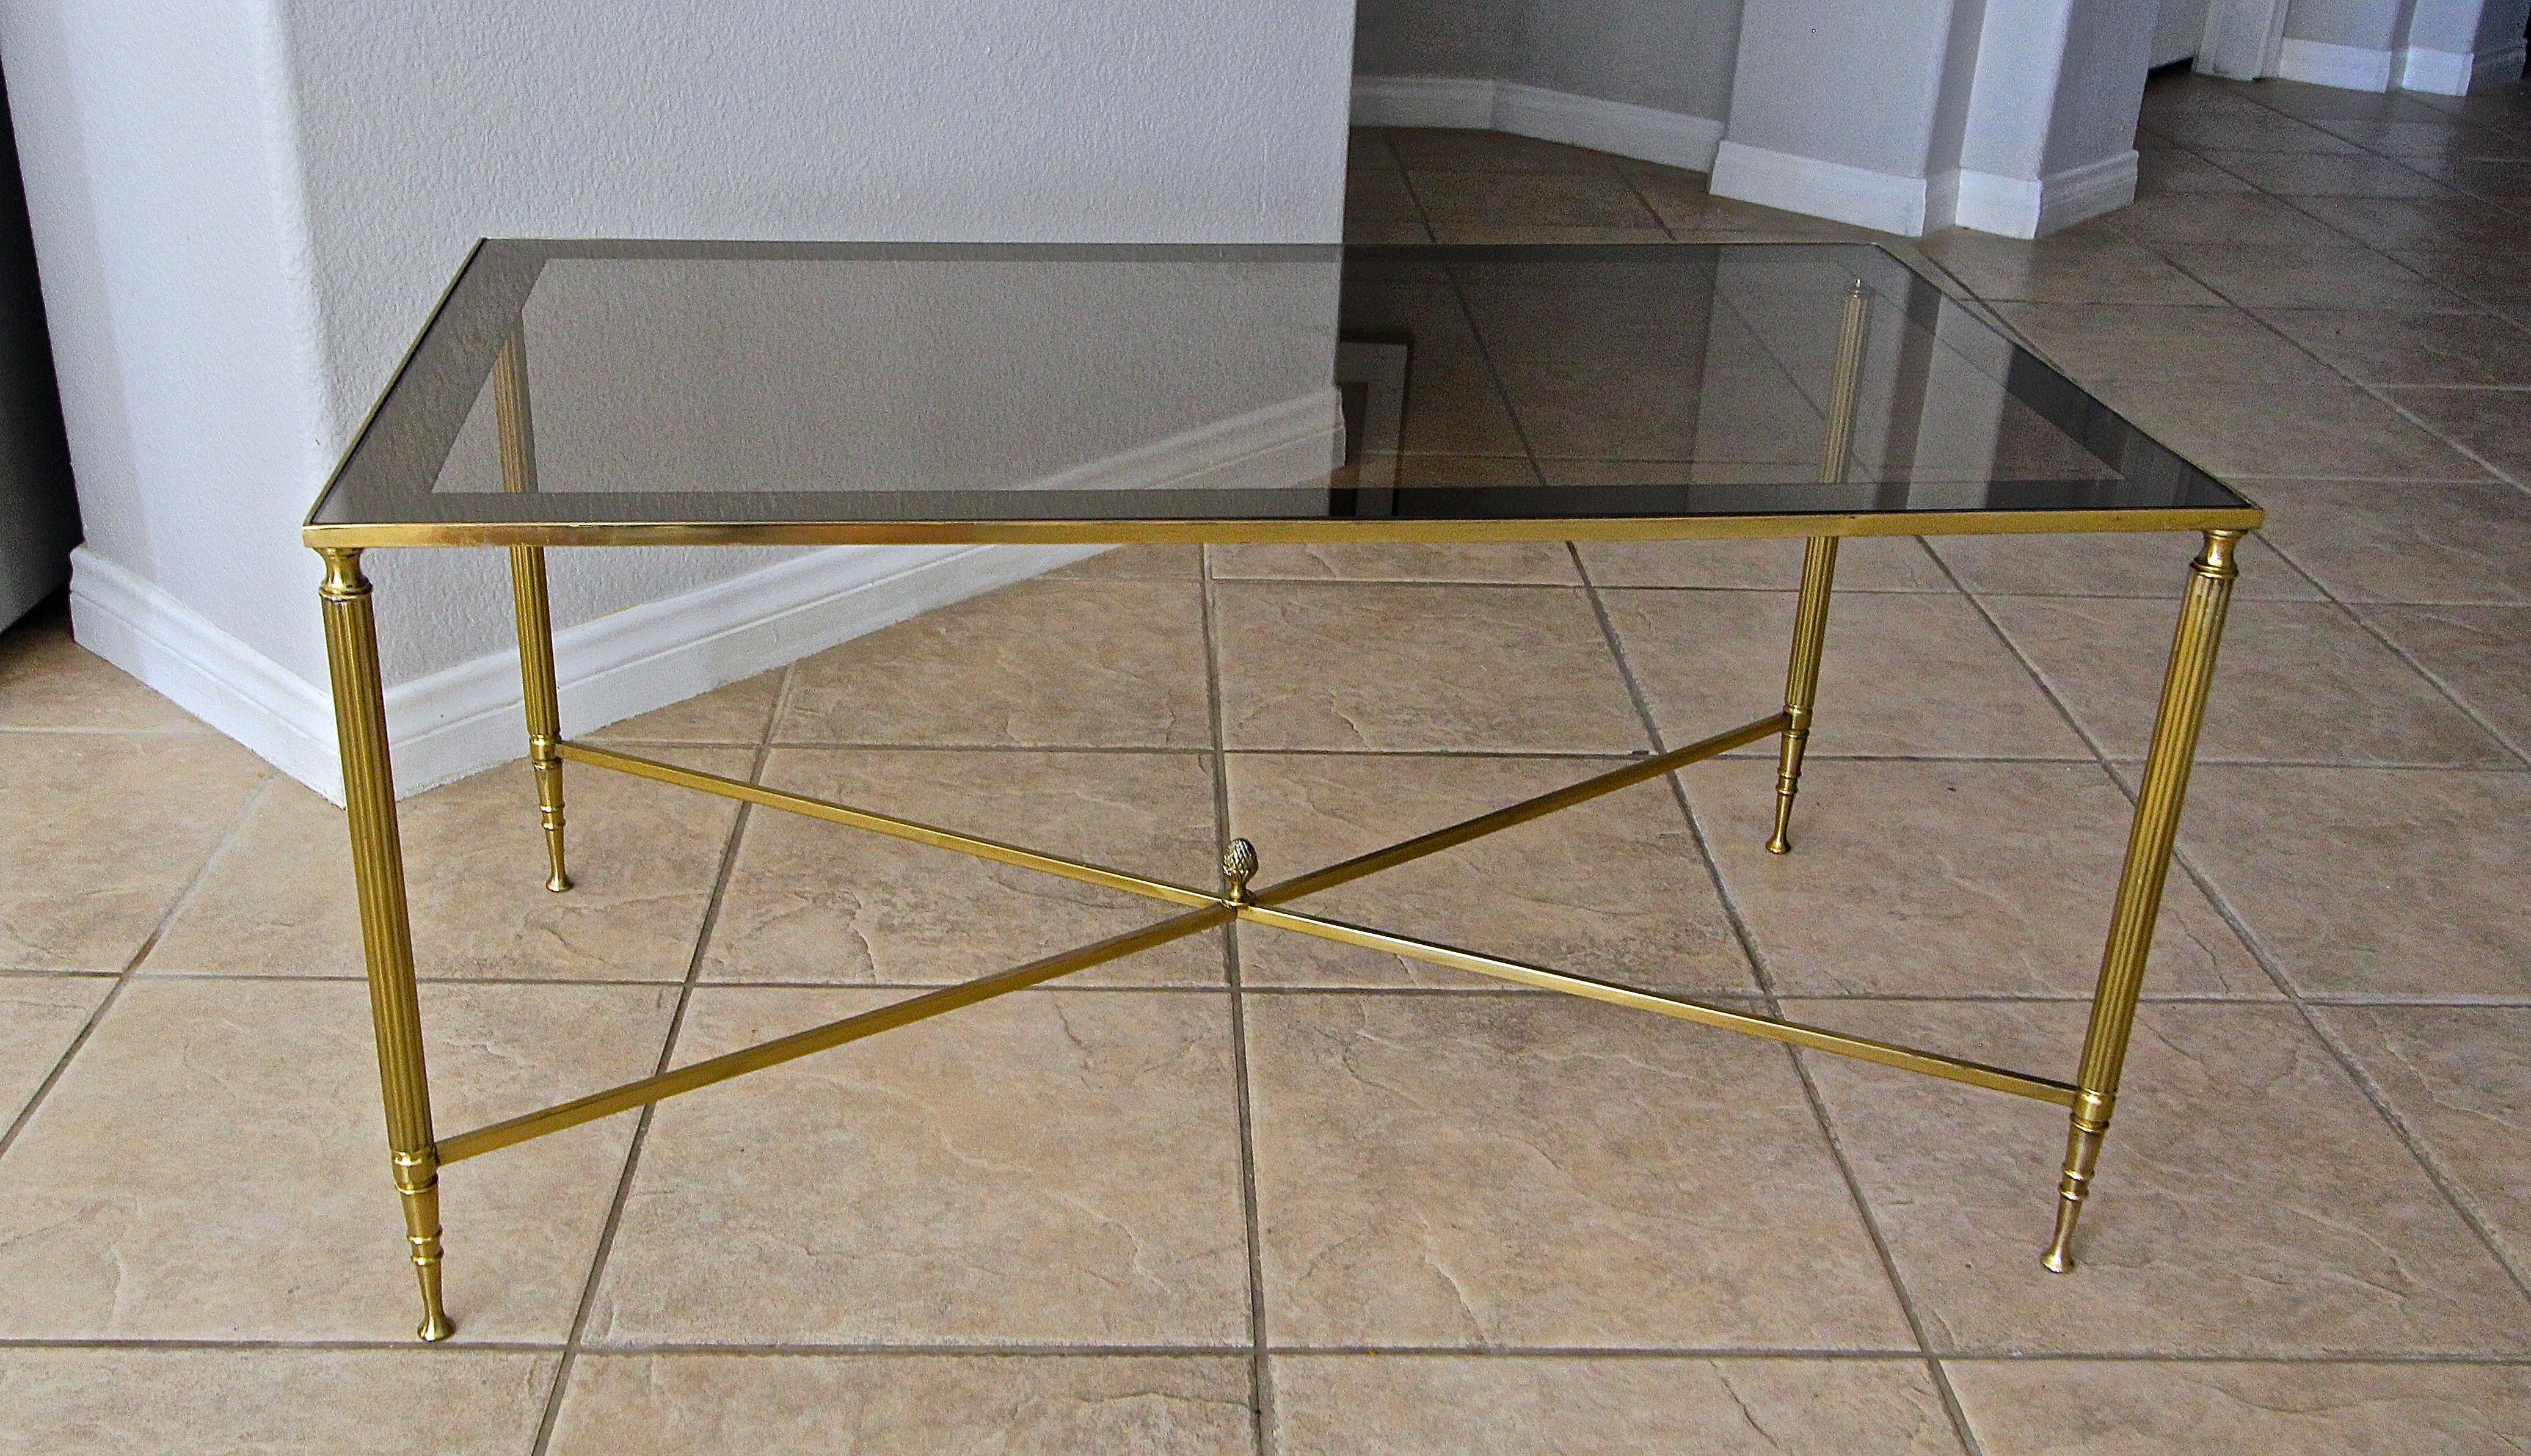 French brass X base coffee or cocktail table with inset tinted mirror edge top. Nicely detailed with reeded legs, X stretcher and acorn center finial.